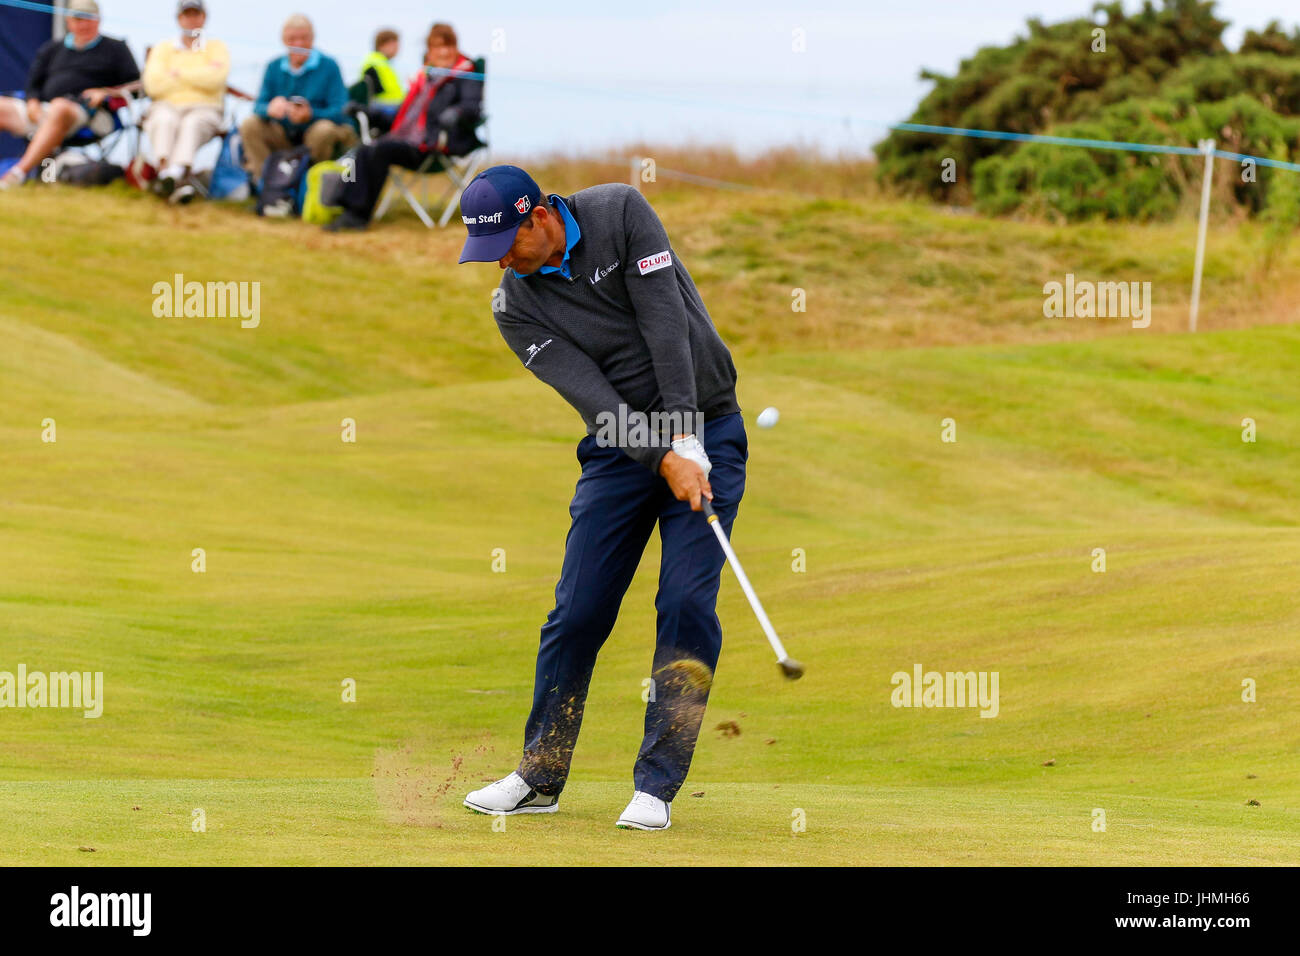 Irvine, Ayrshire, Scotland, UK. 14th July, 2017. On the second day of the Scottish Open, players were hoping to play well and make the cut. After the calm weather on the first day some players were finding the conditions of strong winds and links style golf difficult while others played better than on the first round. Credit: Findlay/Alamy Live News Stock Photo